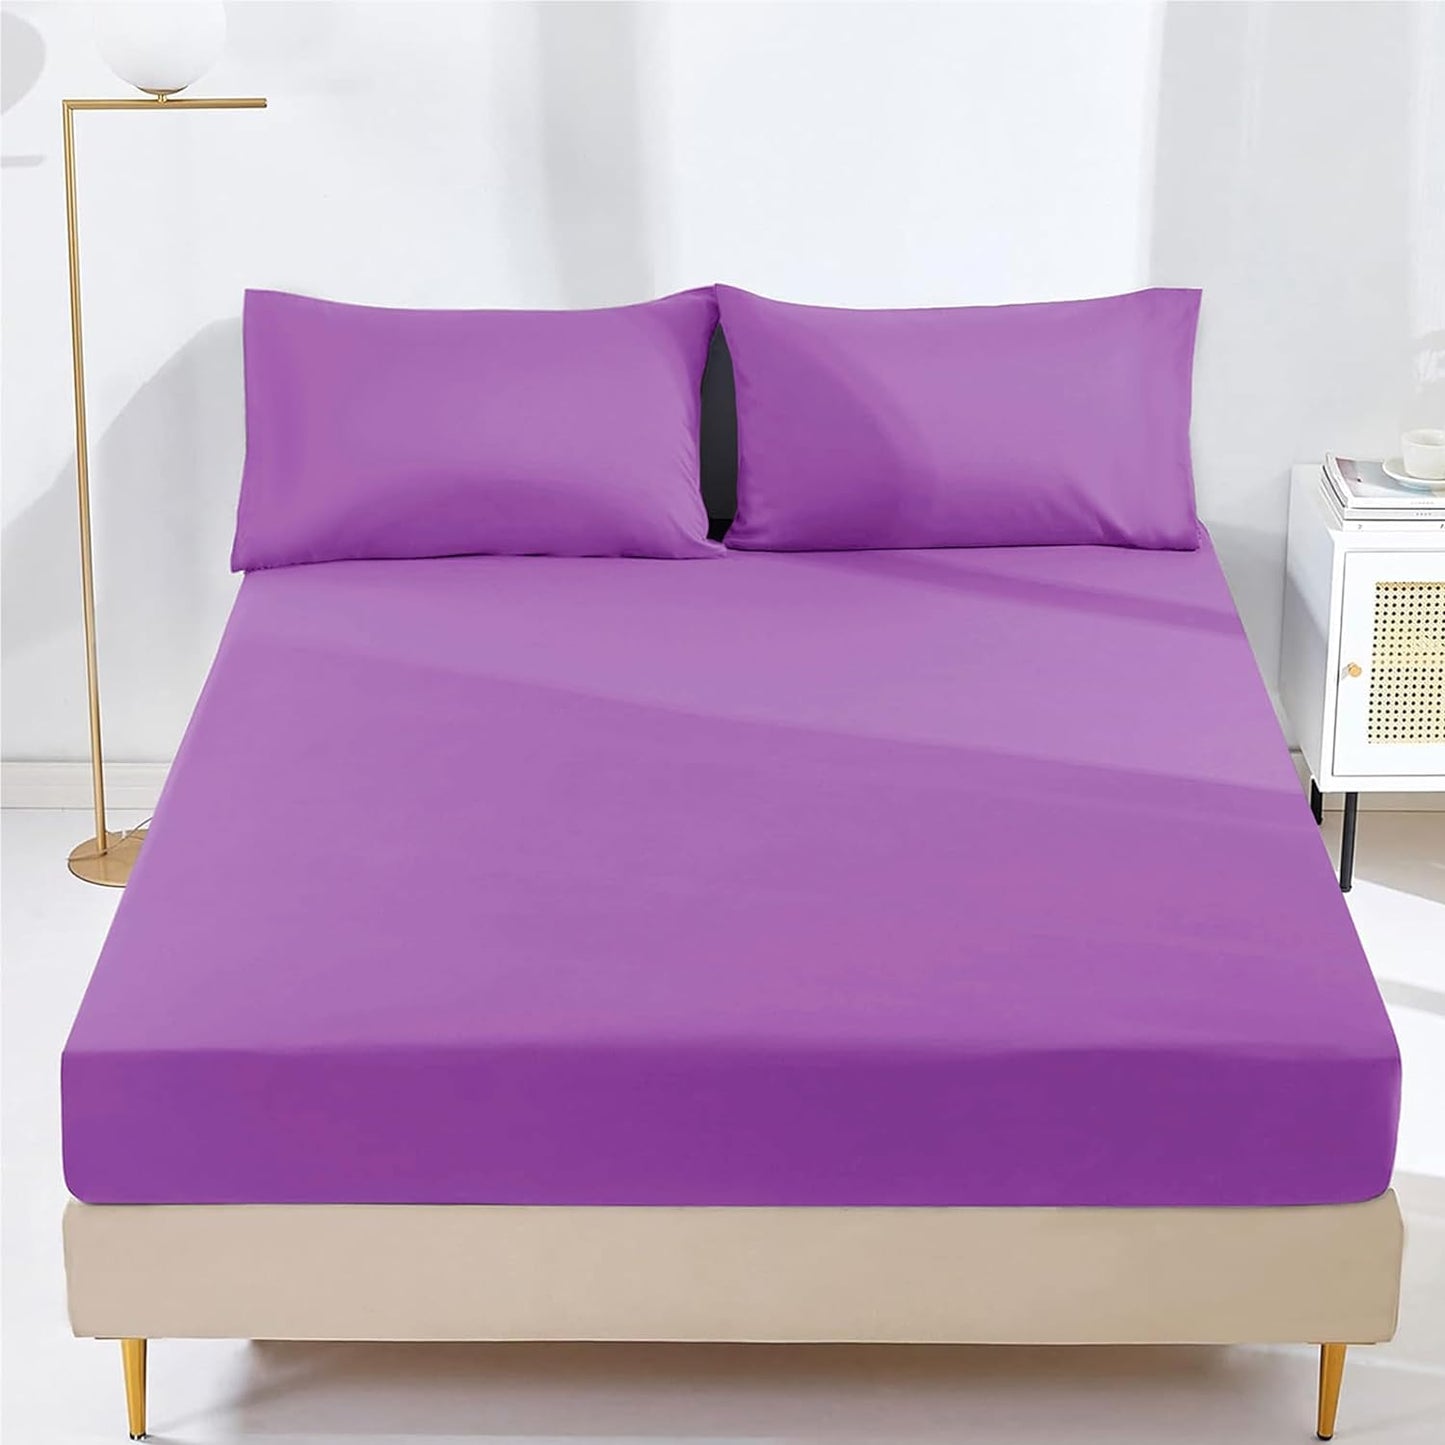 25cm Microfiber Fitted Sheet - Non Iron Wrinkle Soft Elastic Fitted Bed Sheets